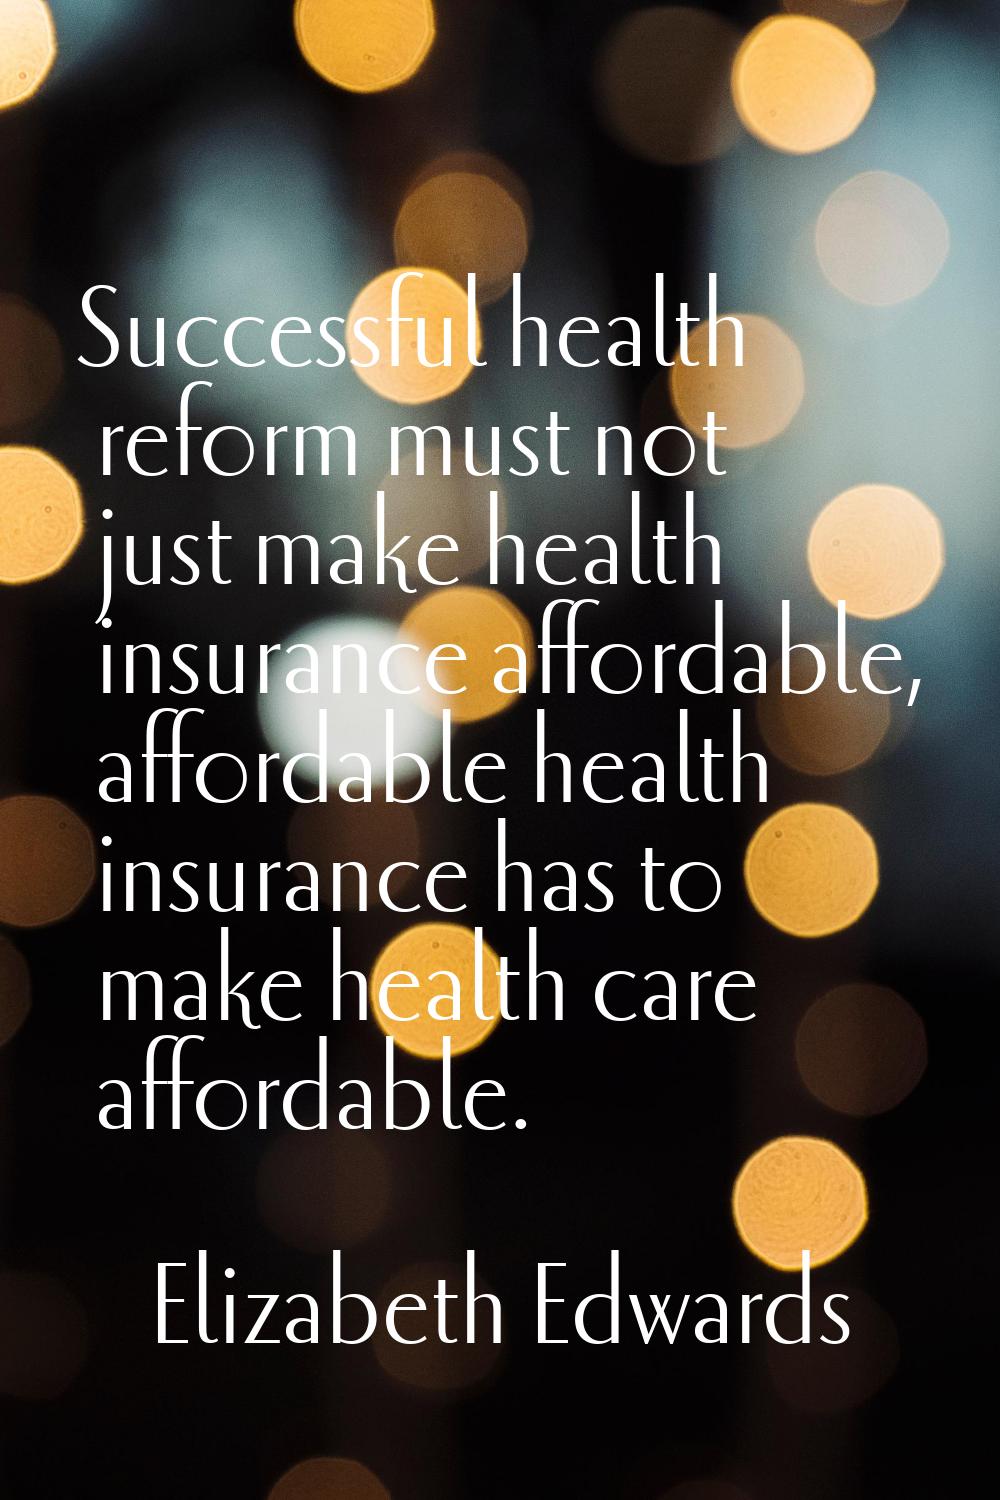 Successful health reform must not just make health insurance affordable, affordable health insuranc